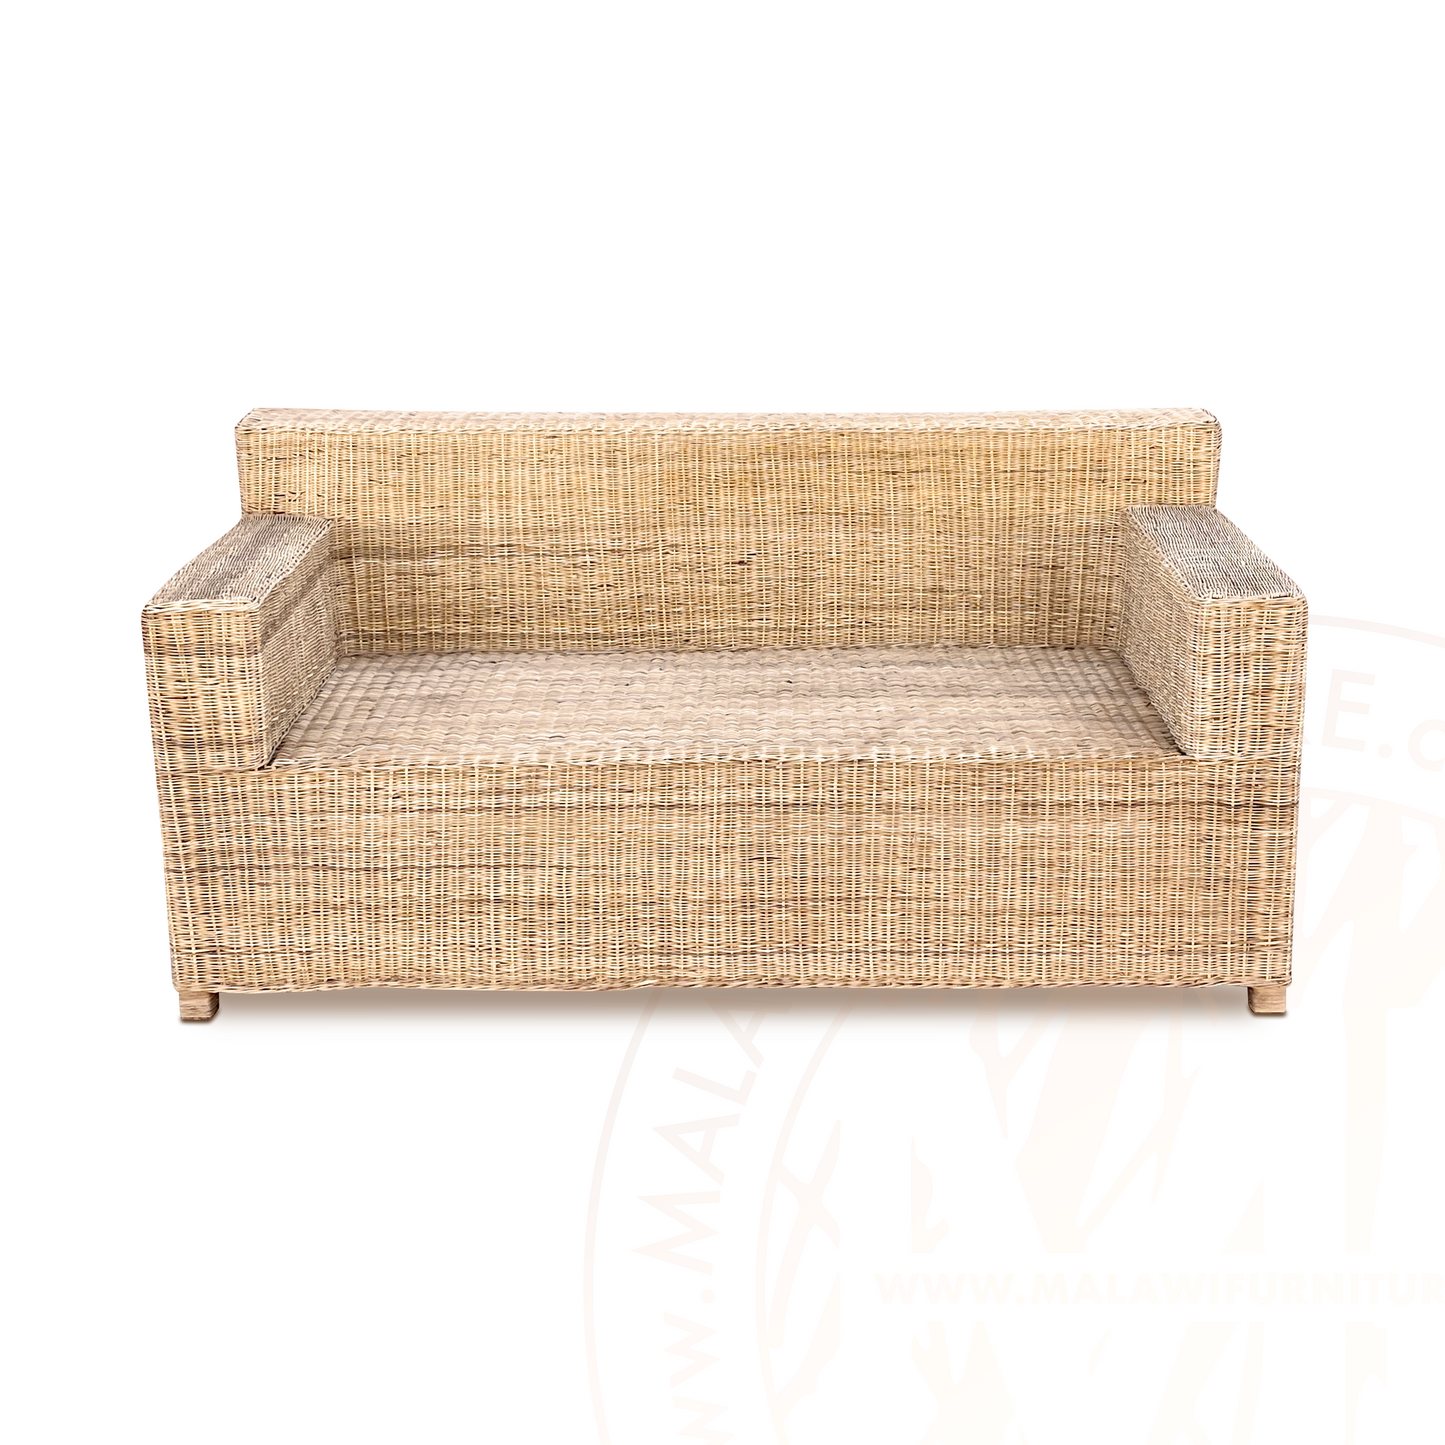 BOX Malawi Couch two Seater hand weaved woven rattan cane chair malawi with cushion